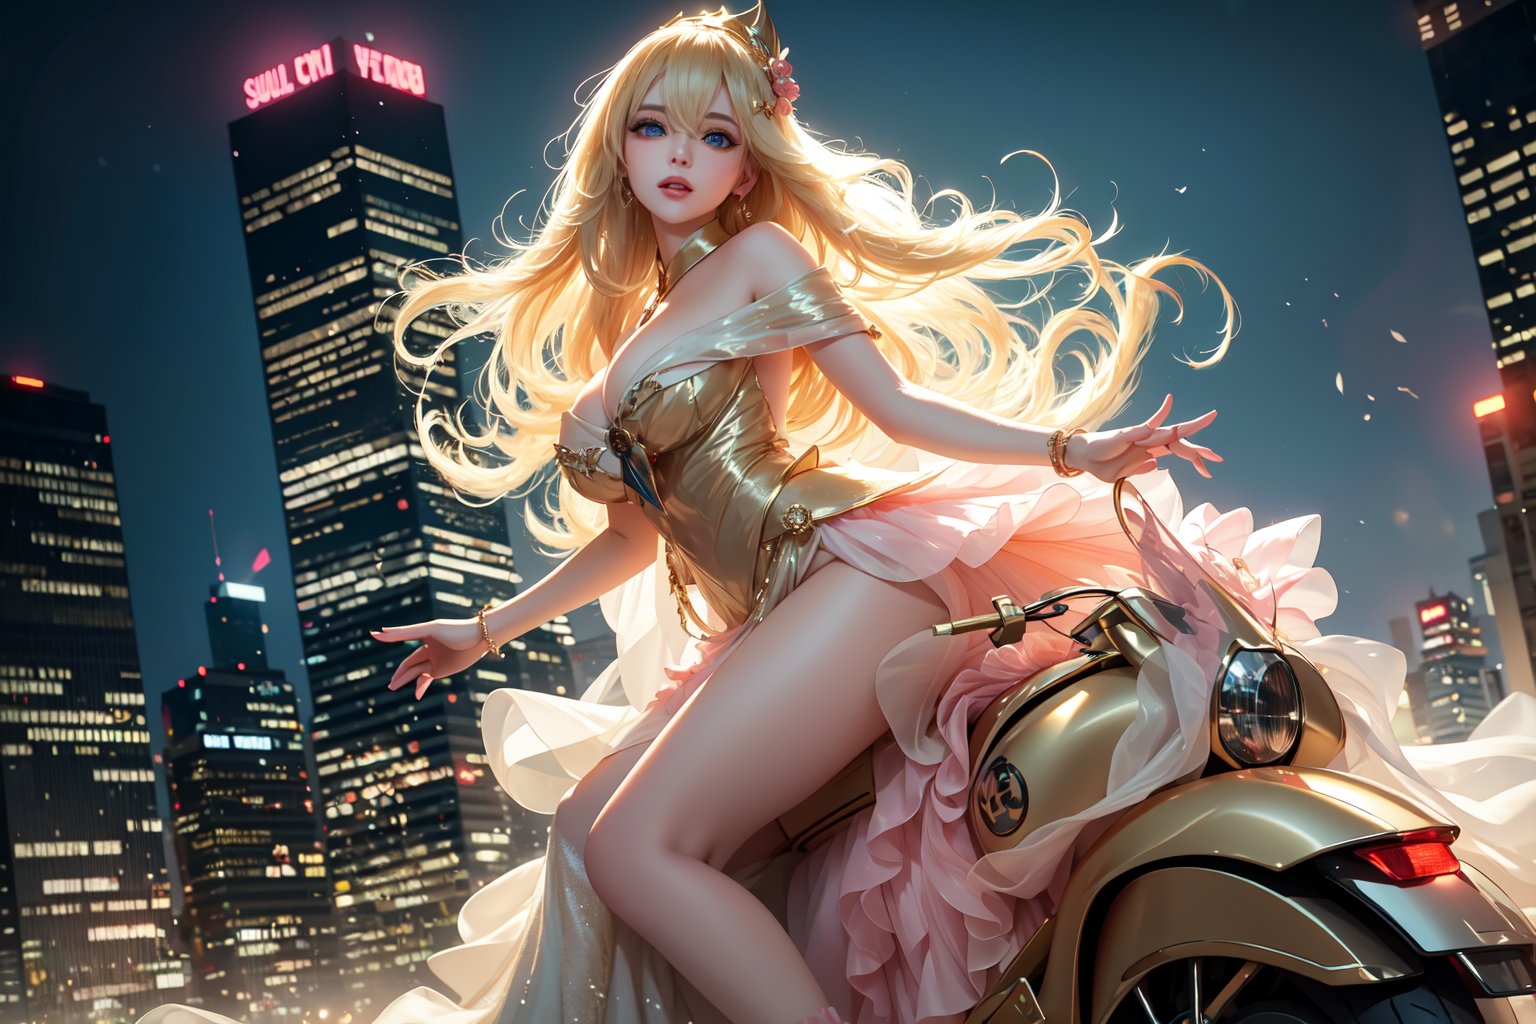 In a neon-drenched urban landscape, a sultry goddess astride a powerful motorcycle strikes a confident pose amidst towering skyscrapers. The vibrant glow illuminates the blue-pink frilled wedding dress clinging to her curves, showcasing the Wizard's hat-adorned bangs and off-shoulder design. Blond locks cascade down like a river, framing her striking features and golden hair flowing behind her. Piercing blue eyes gleam with mischief as she confronts the viewer beneath an ornate hair ornament on her flowing locks. City lights accentuate her features, highlighting sugary sweet sensuality in this Sugimori Ken-inspired art piece.